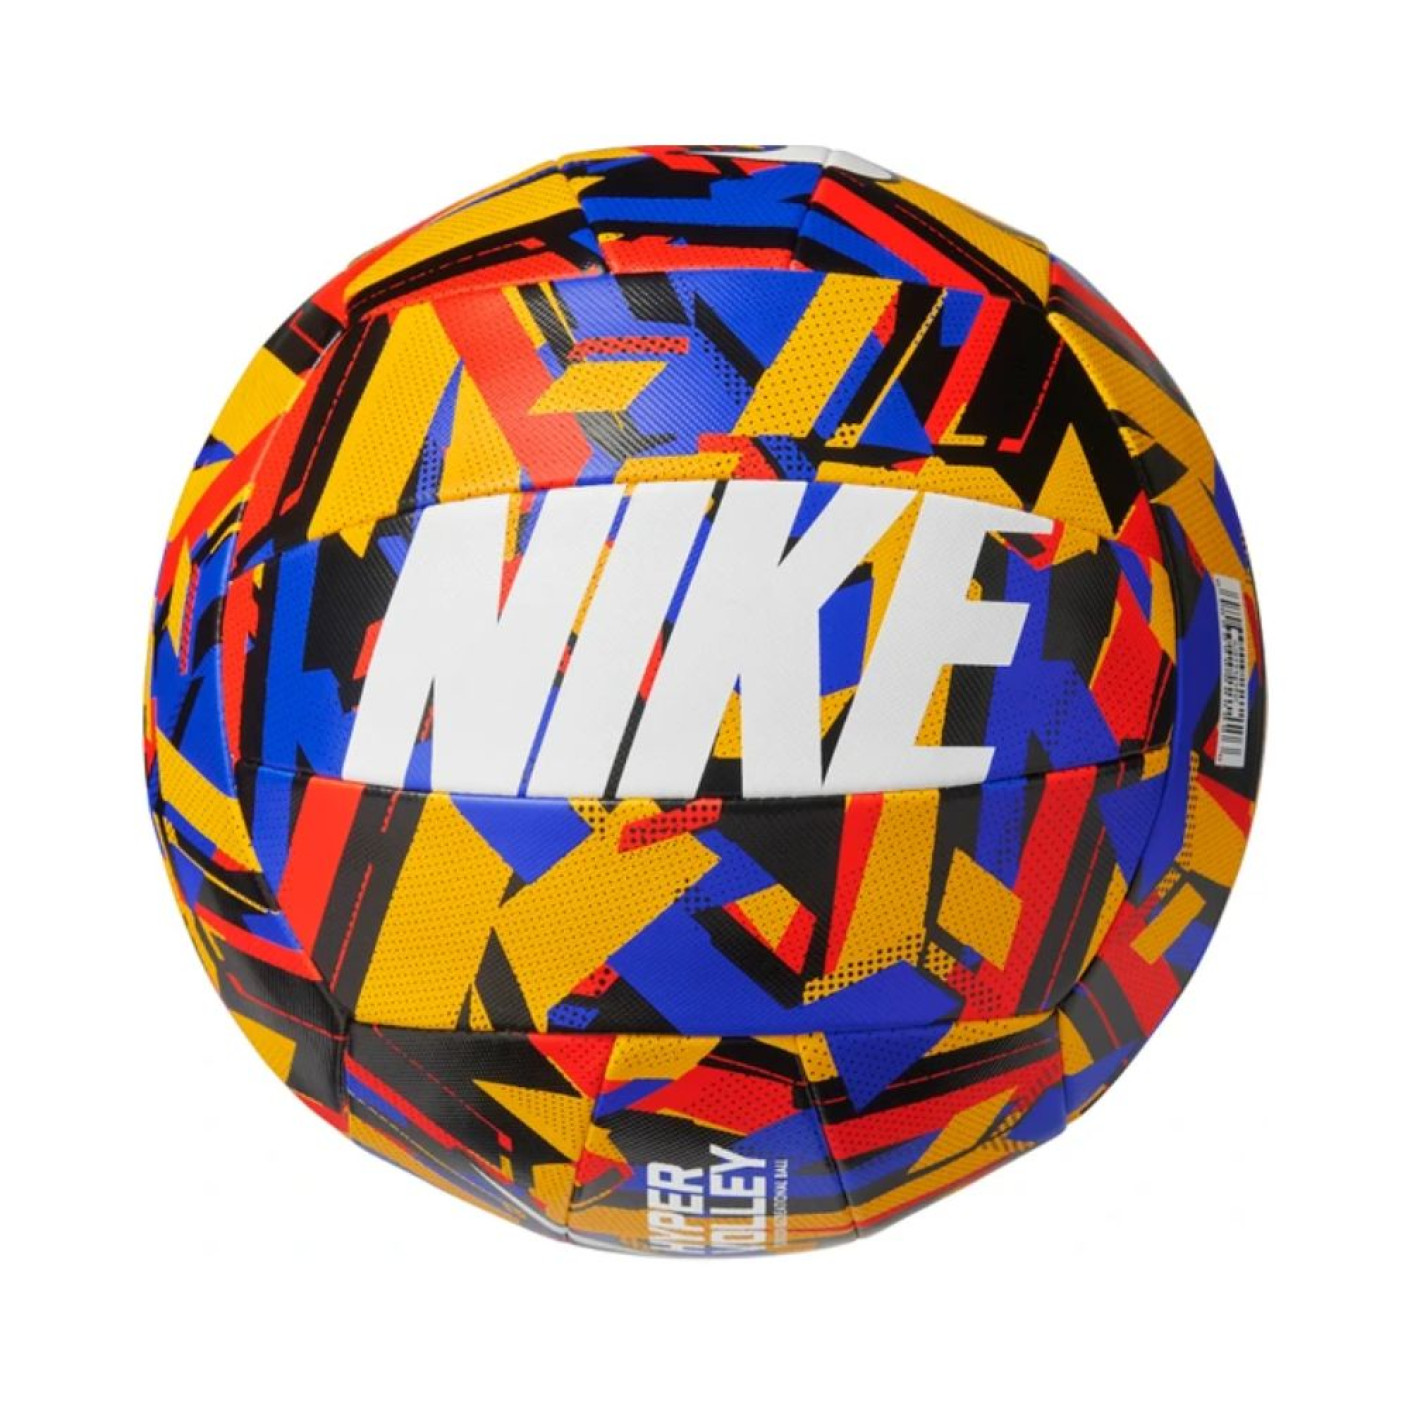 Nike Hyper Graphic Foot Volleyball Multicolor